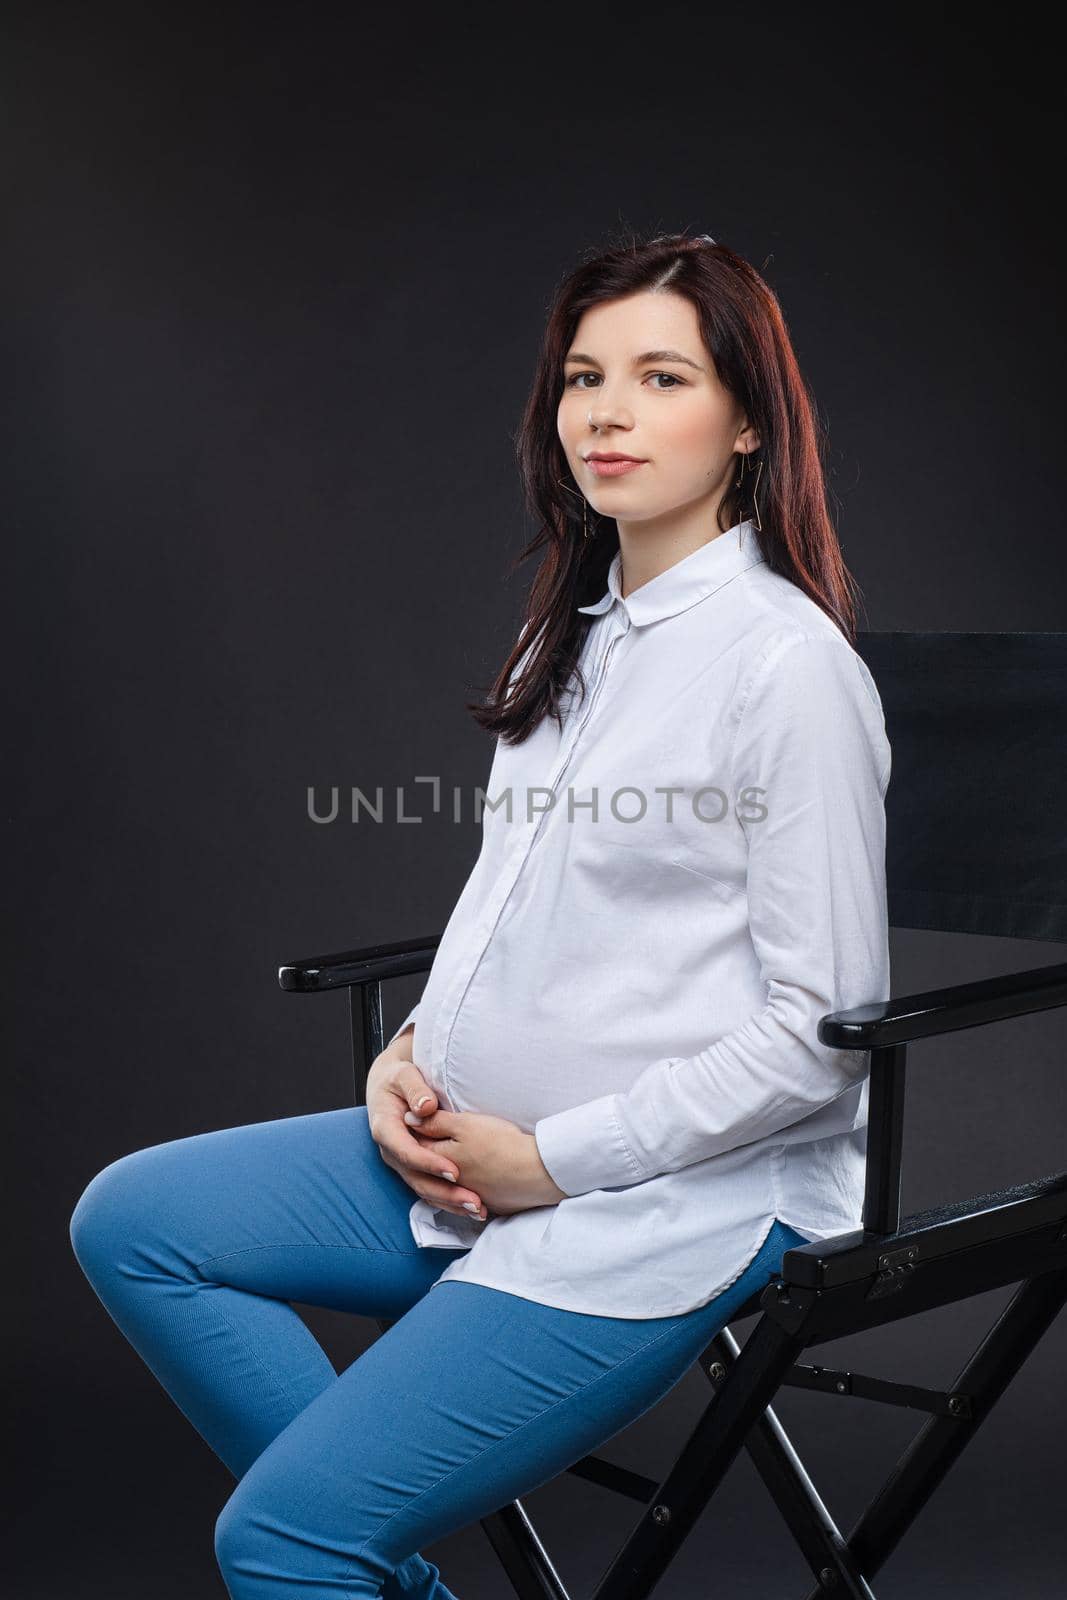 attractive pregnant woman with dark hair sitting on a black chair and smiling to the camera, picture isolated on black background by StudioLucky